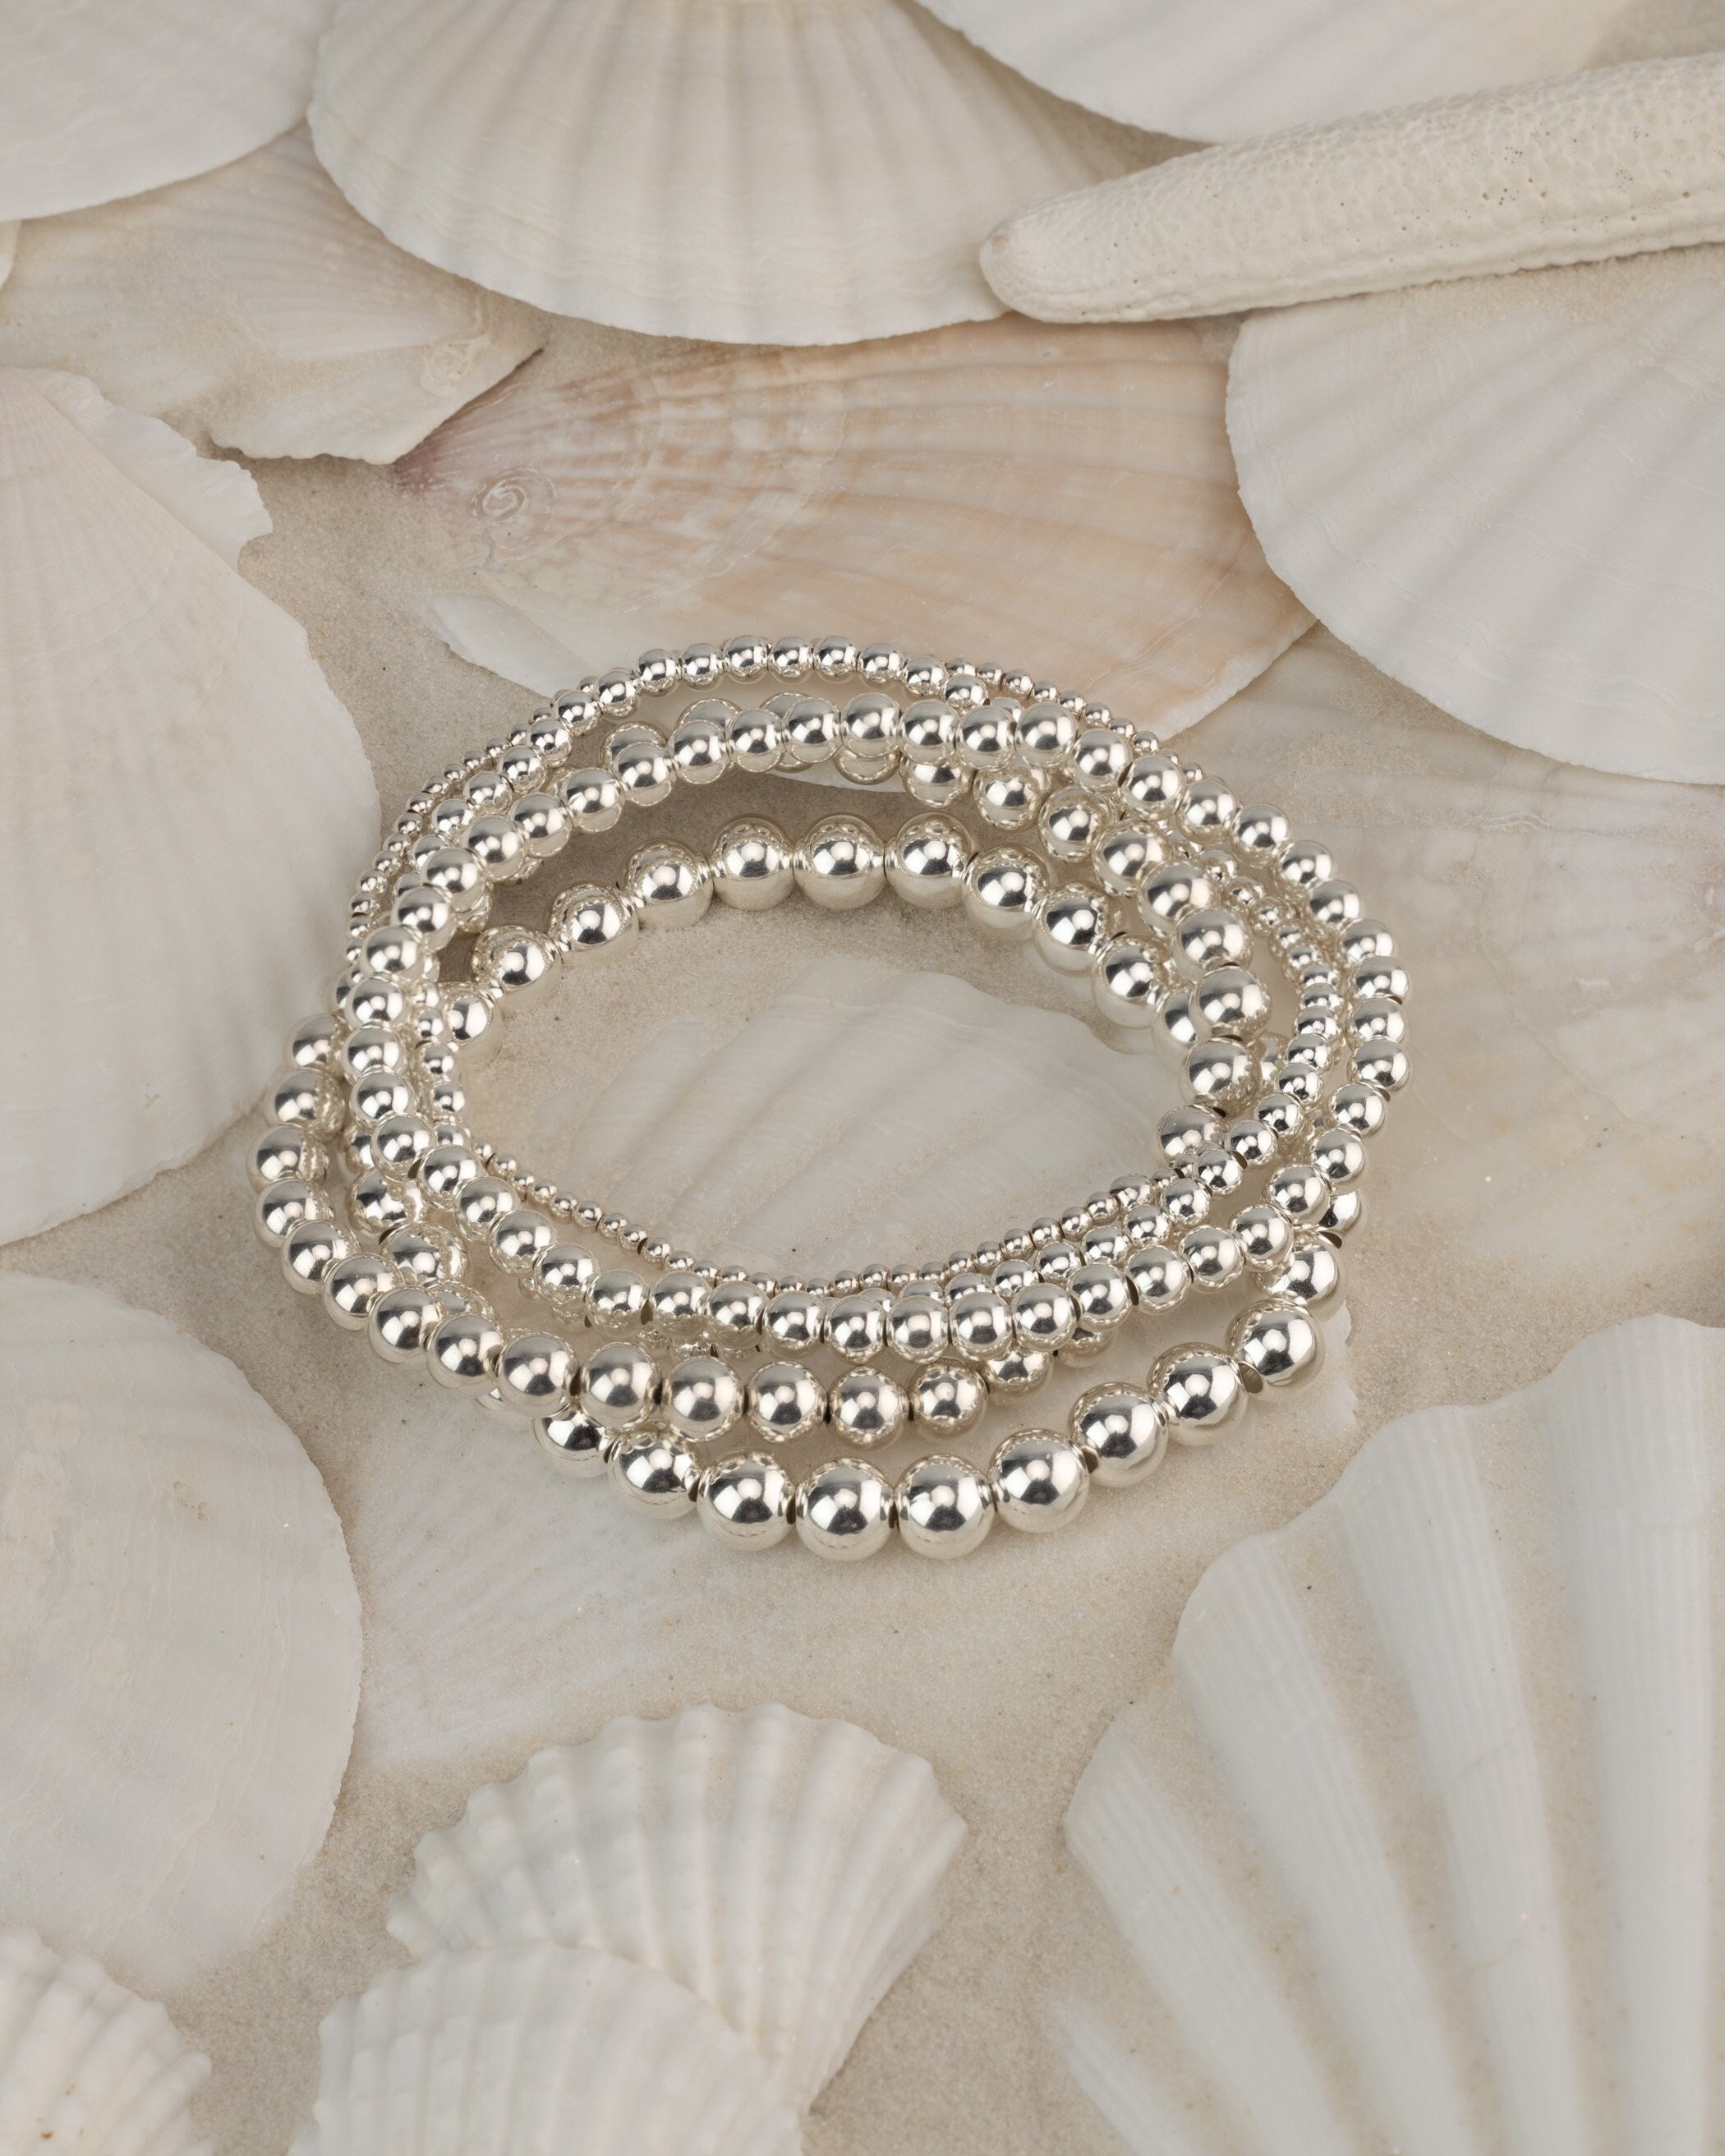 4mm & 6mm Sterling Silver Beaded Bracelet Average (7 Inches)